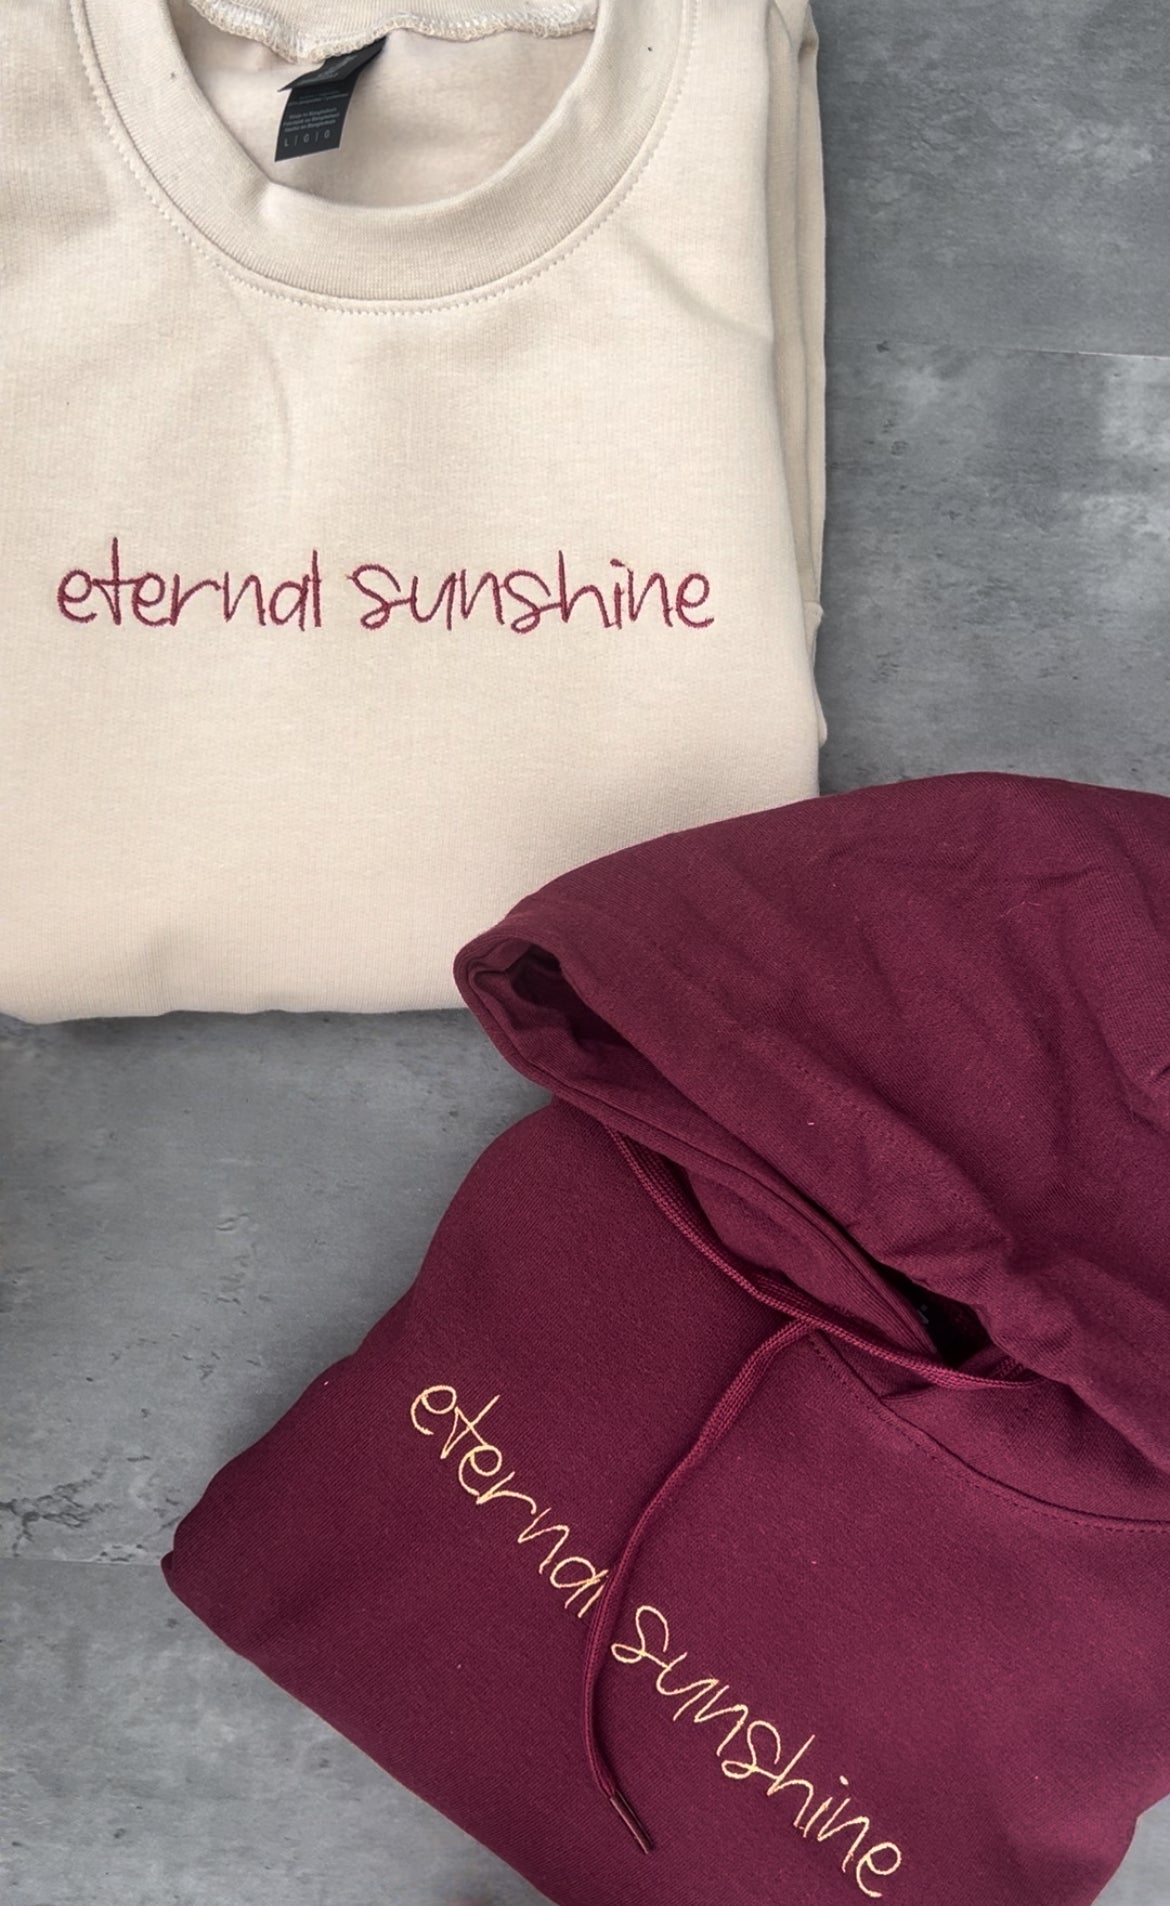 Ariana grandes eternal sunshine album font and text embroidered onto a maroon sweatshirt in a gold colour and also embroidered onto a beige sweatshirt in a maroon colour